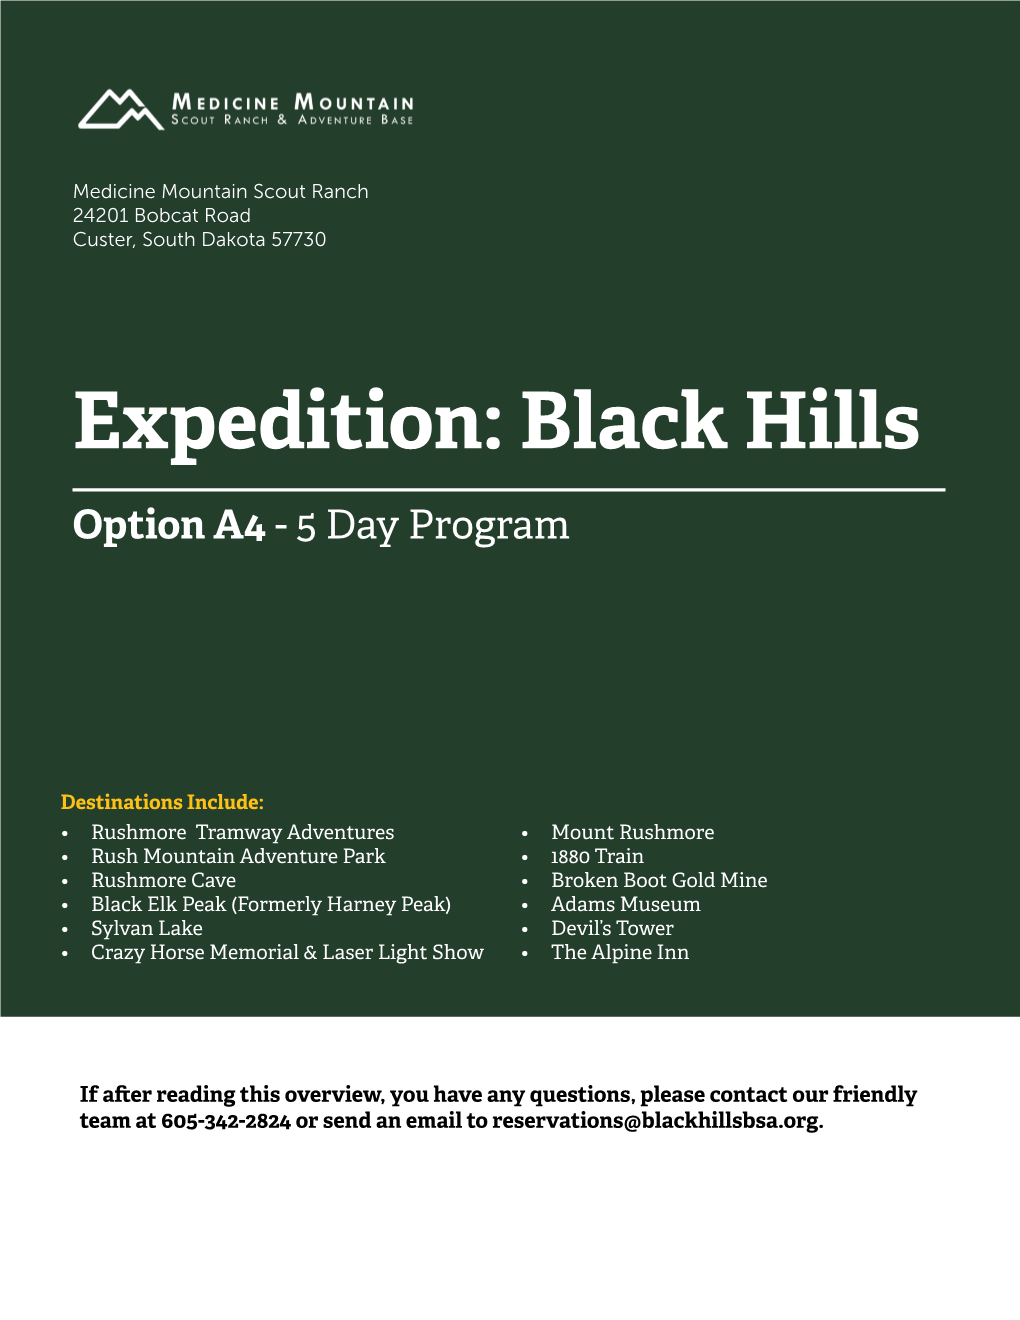 Expedition Black Hills Option A4